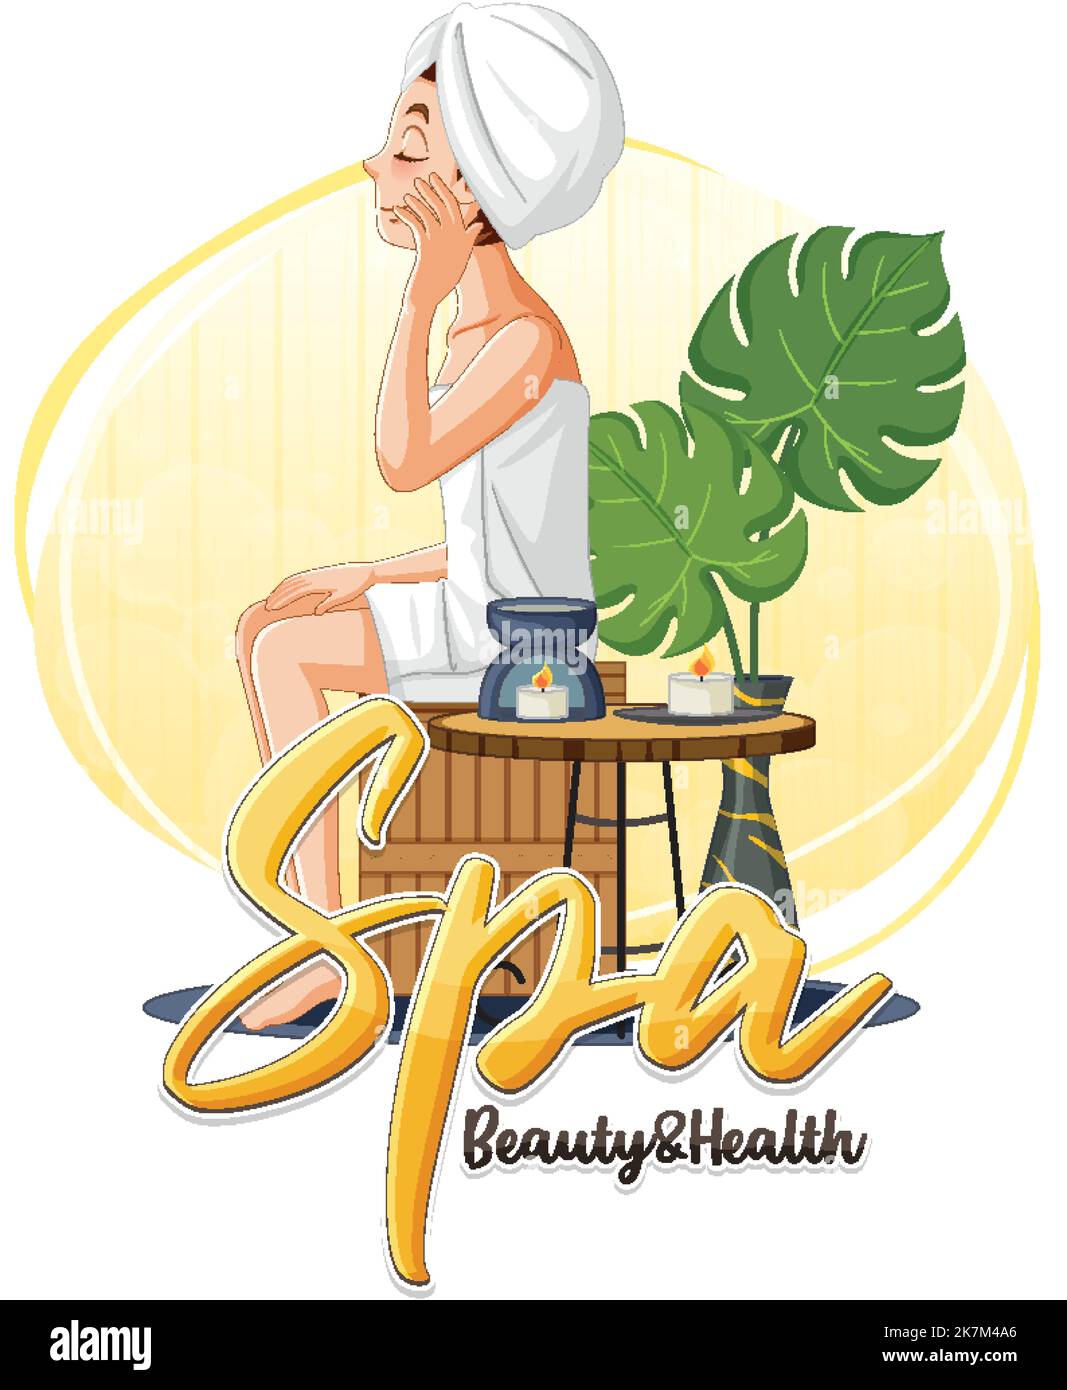 Spa beauty and health text with spa woman illustration Stock Vector